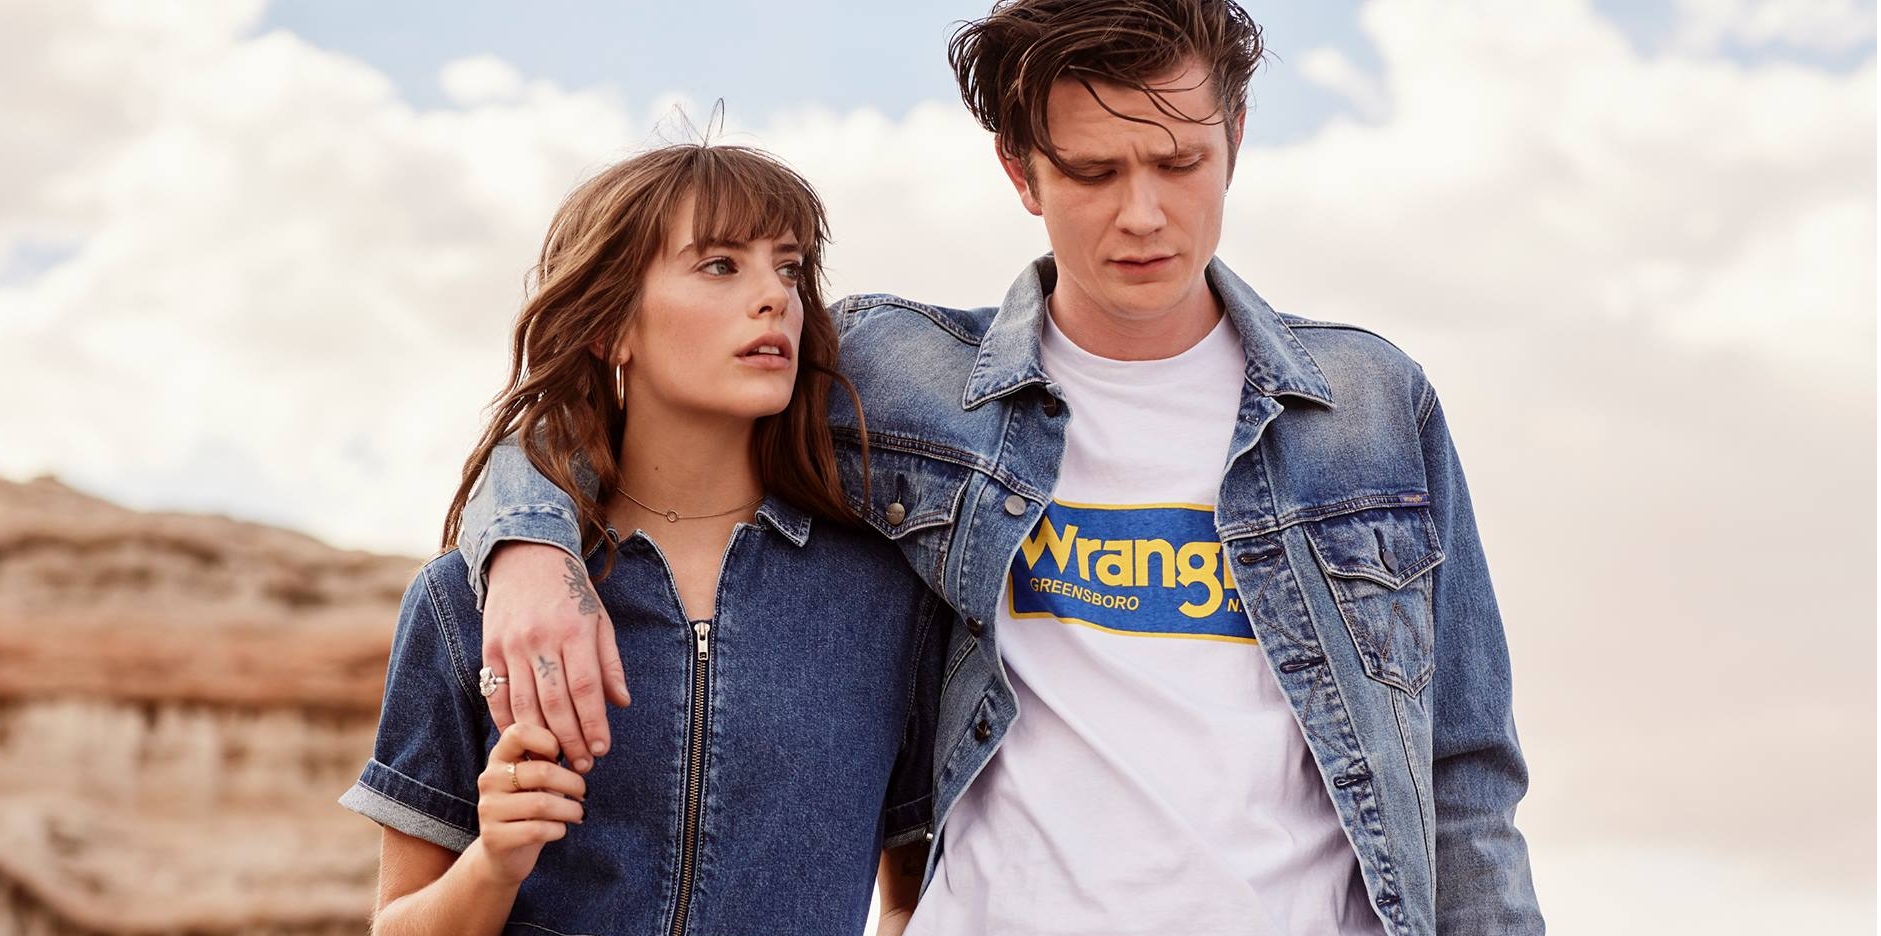 Wrangler Black Friday Sale: 30% OFF sitewide, Free shipping